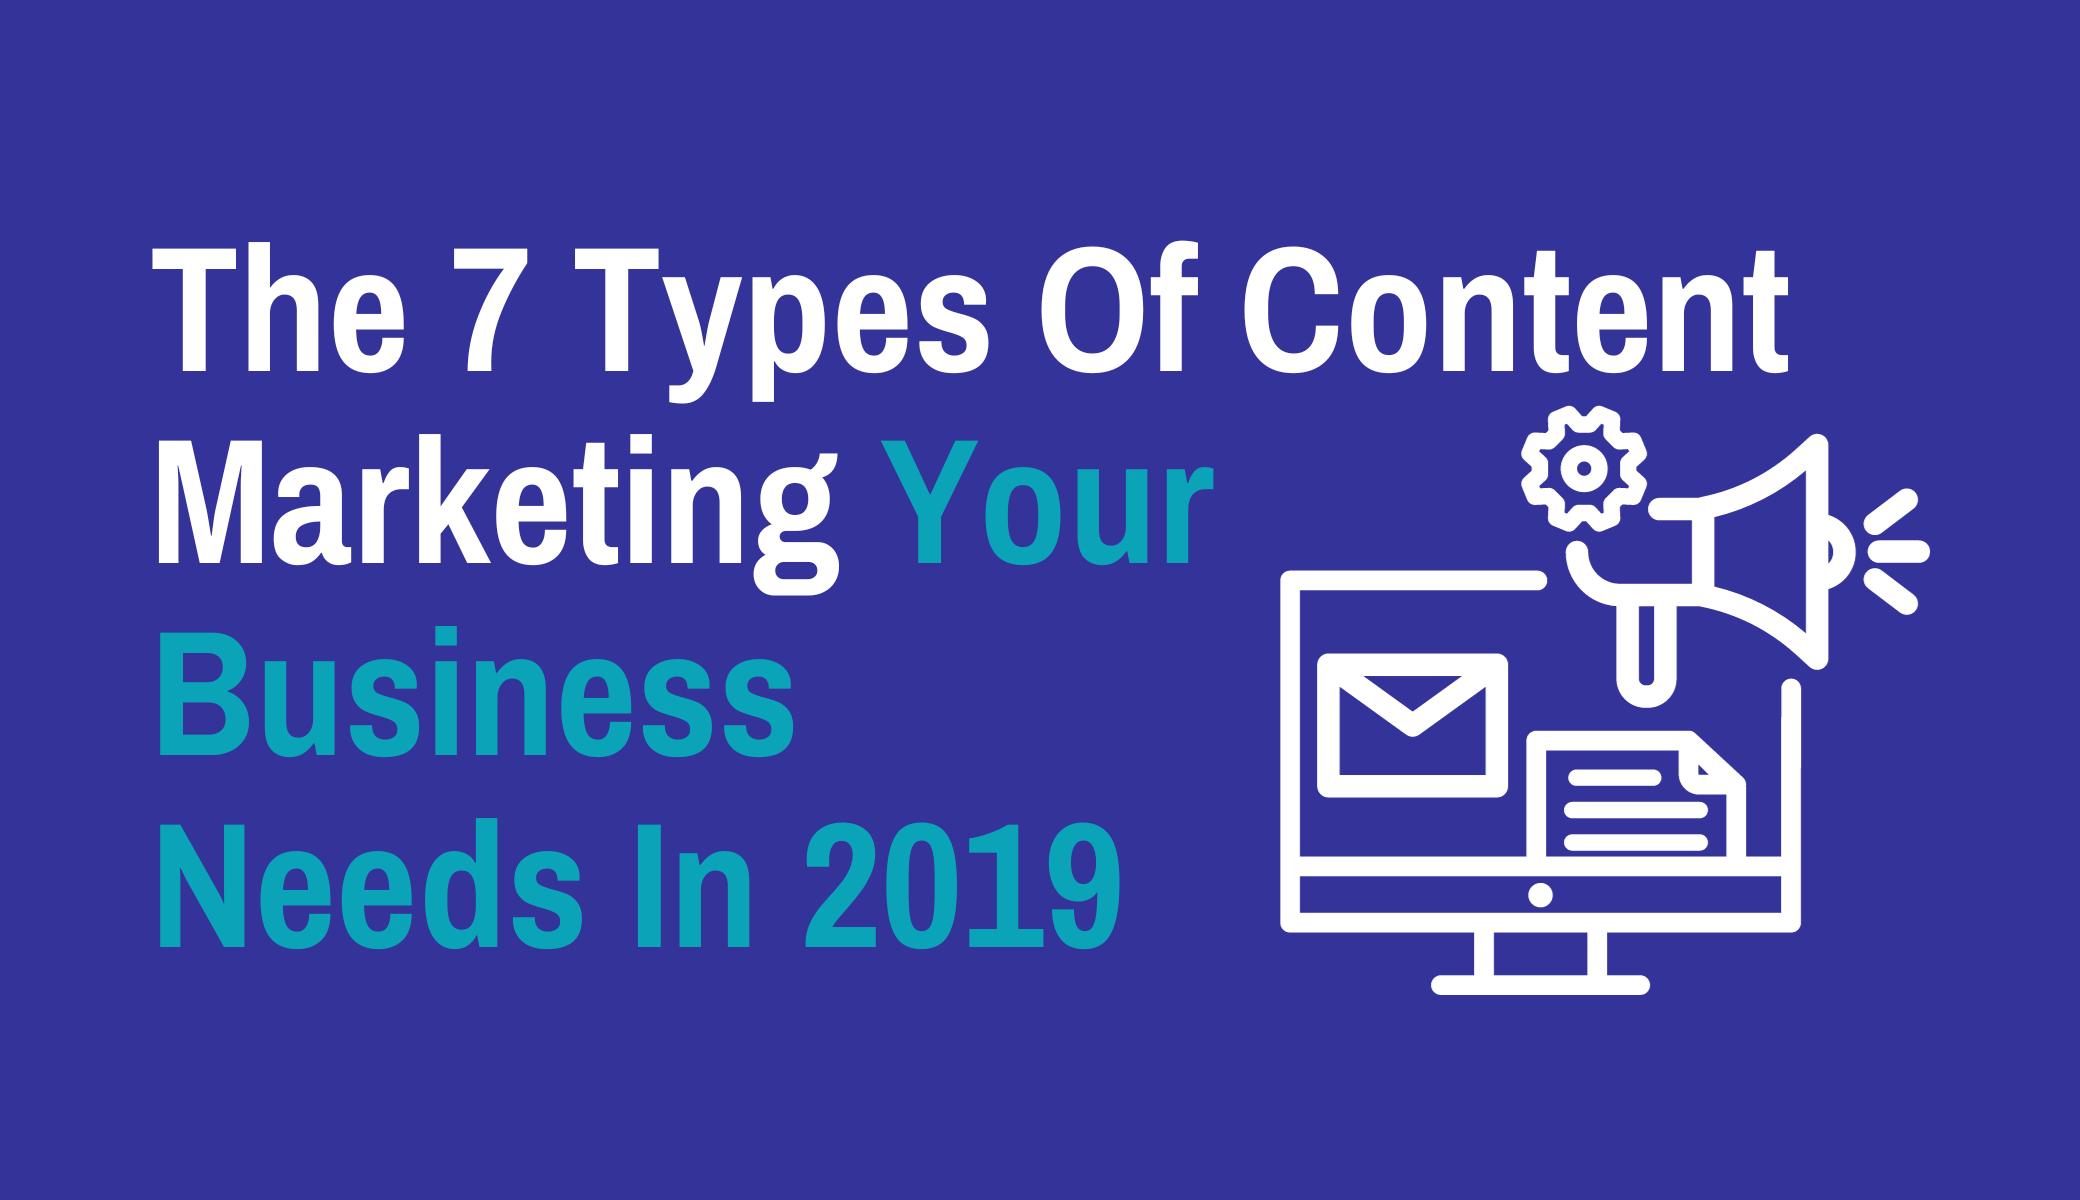 The 7 Types Of Content Marketing Your Business Needs In 2019